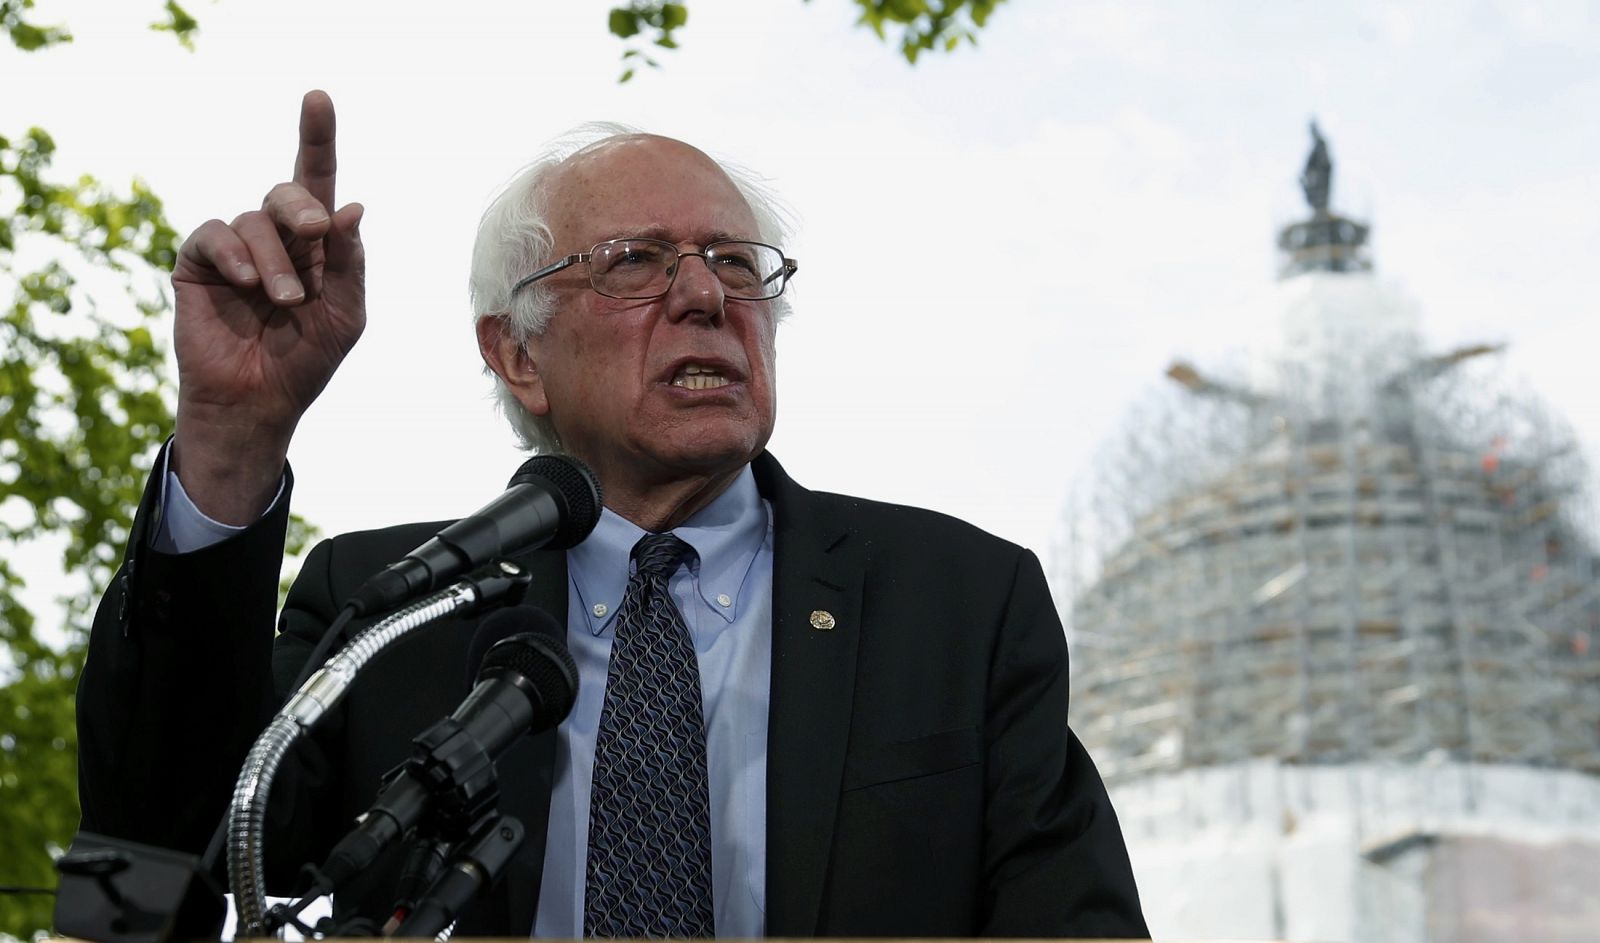 U.S. Senator Sanders holds news conference after announcing his candidacy for the 2016 Democratic presidential nomination, on Capitol Hill in Washington